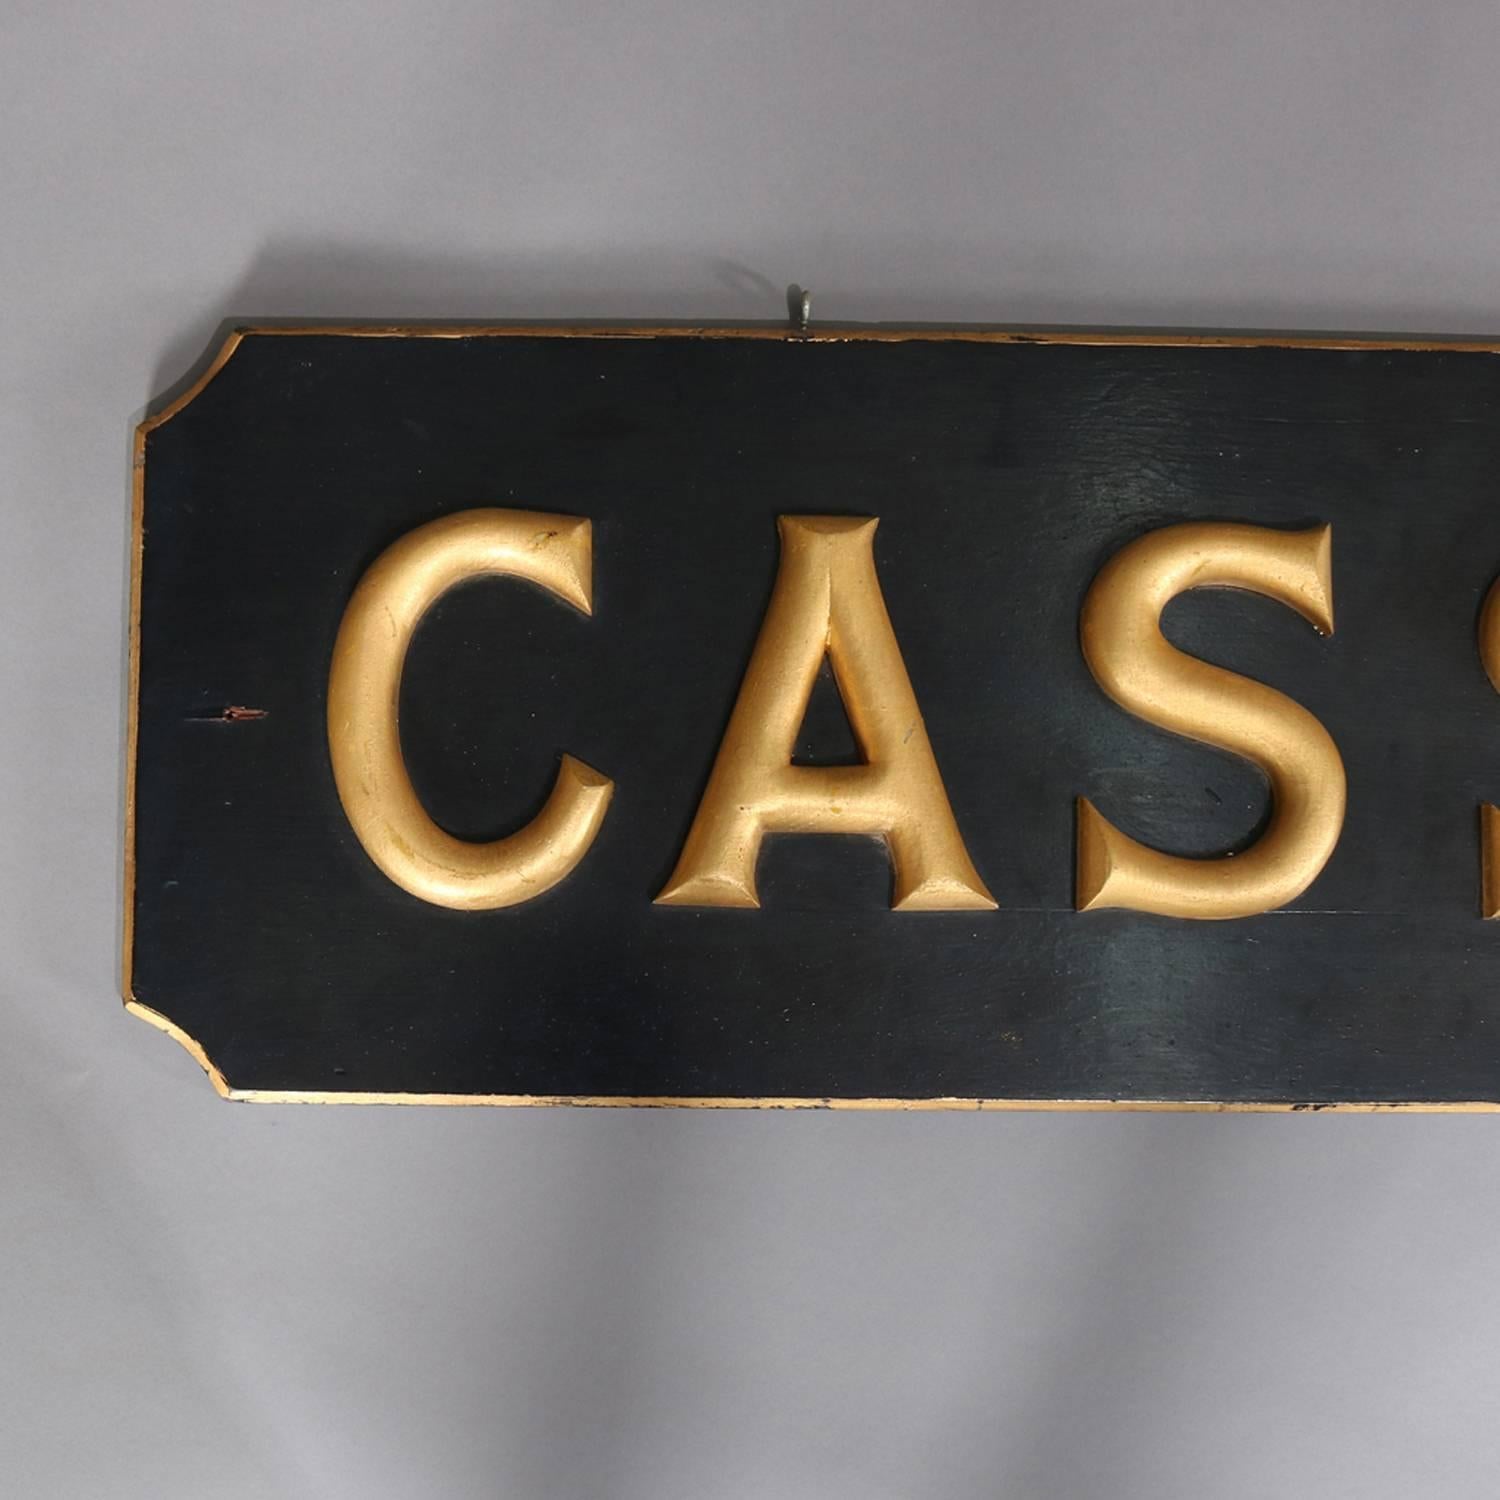 Carved wood advertising sign features high relief 